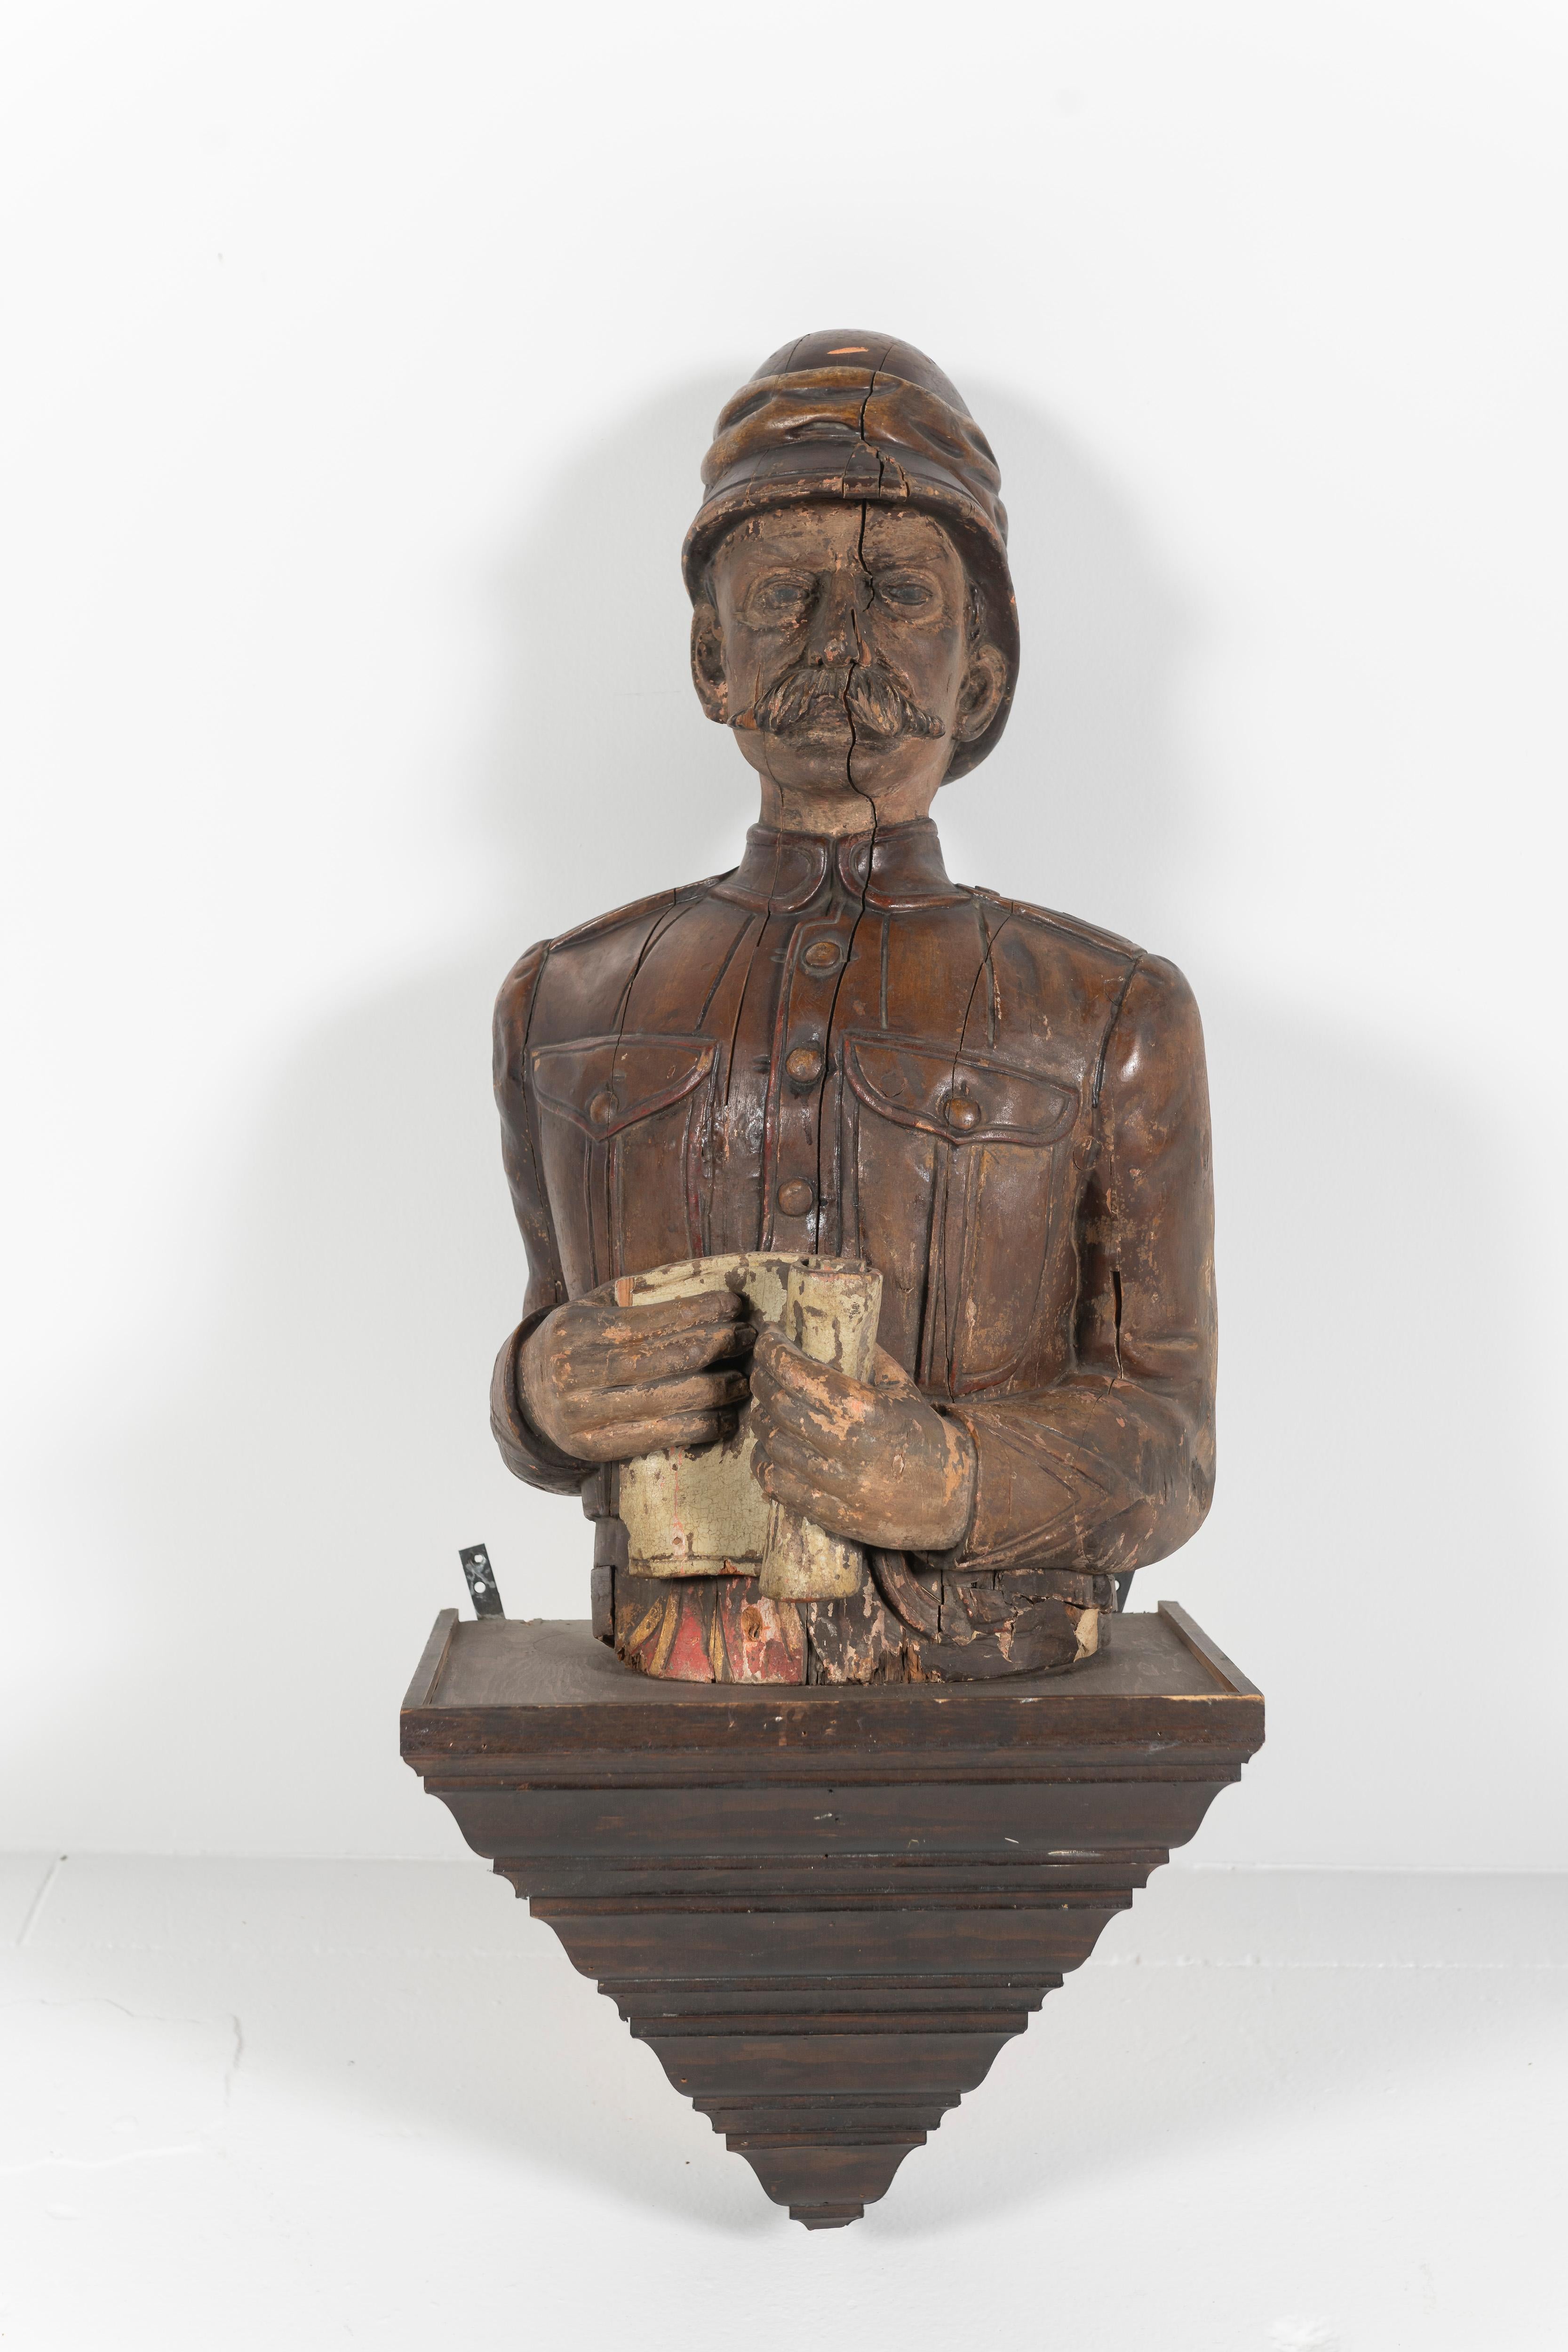 Possibly from a ship, this rare antique late 19th Century English bust is carved and painted, representing a branch of the military. Portrayed in a combat or working uniform. Interesting sculptural addition to your space. Adapted to hang on a wall.